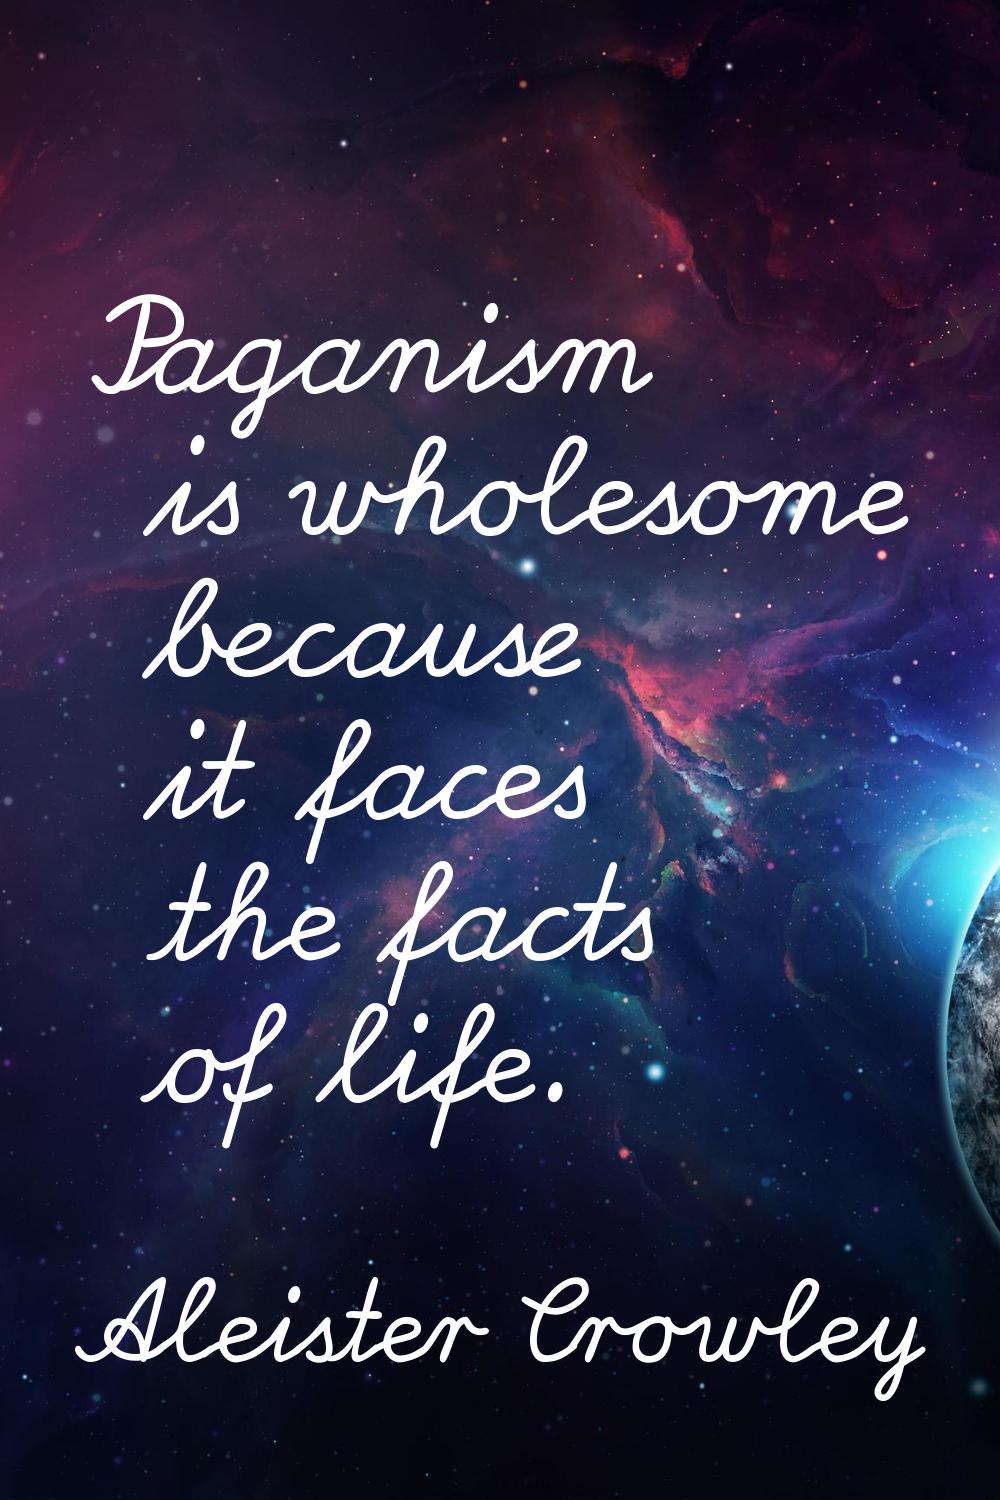 Paganism is wholesome because it faces the facts of life.